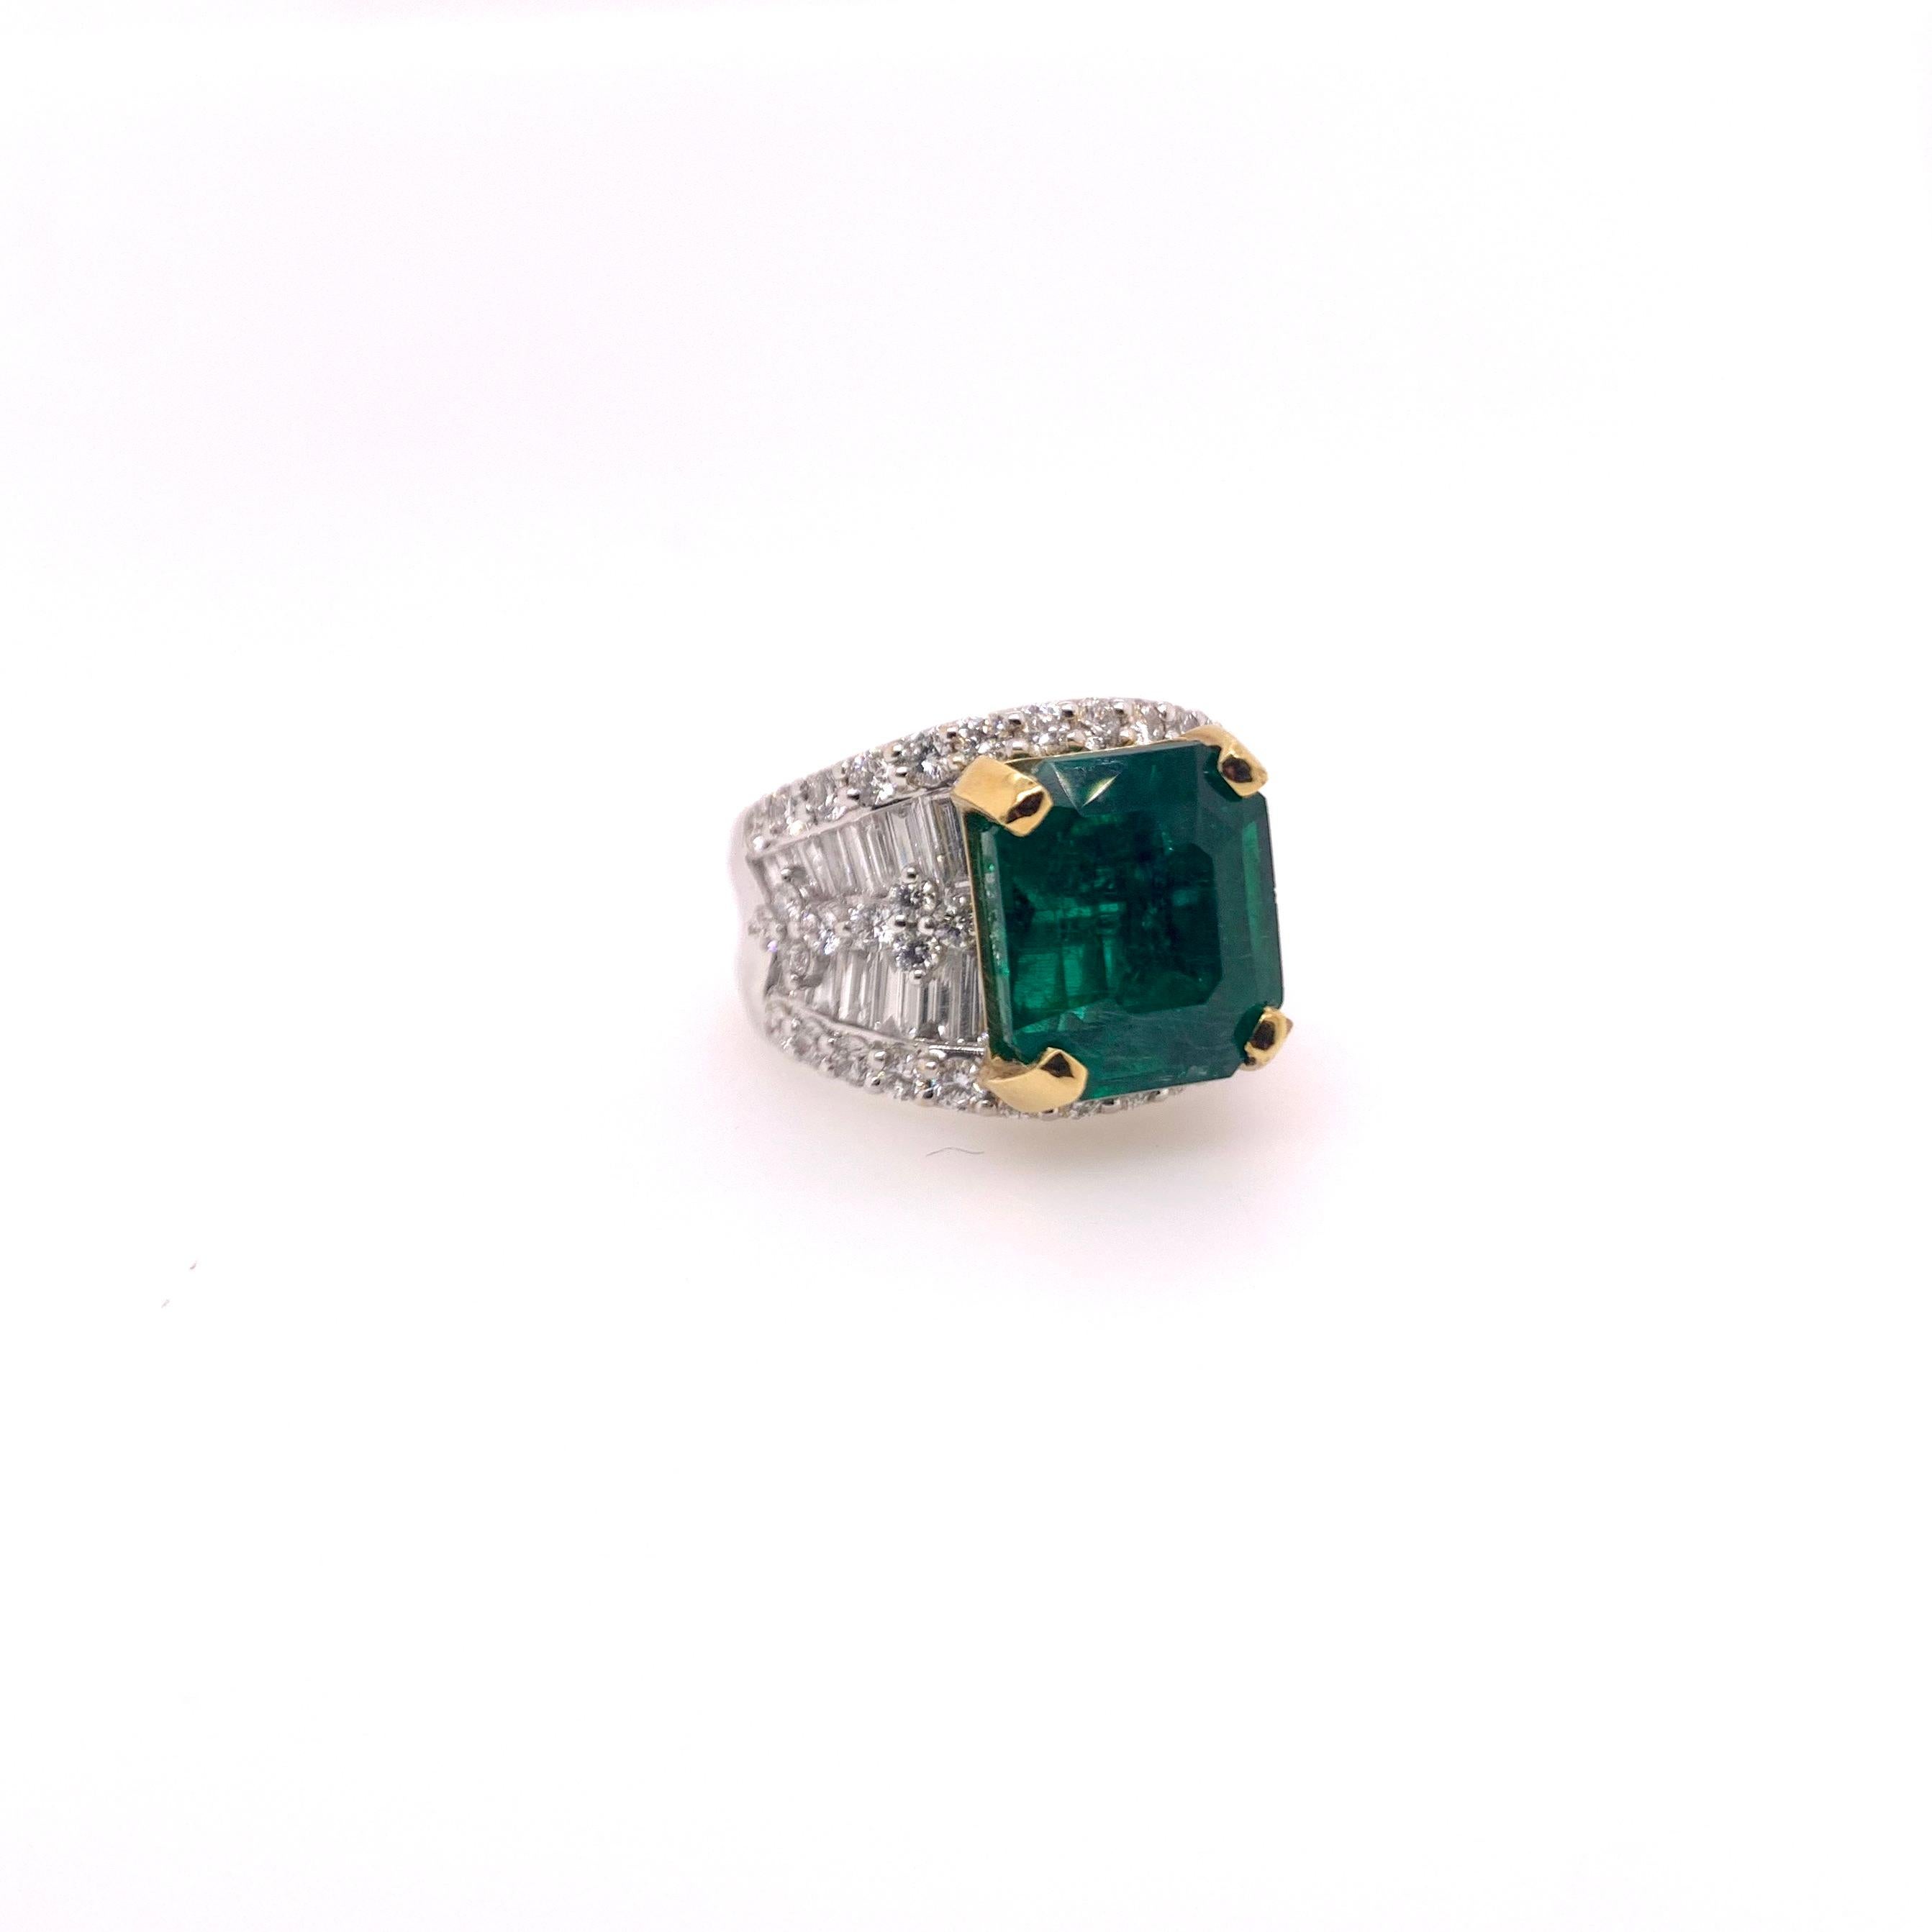 Amazing forest hunter green colored Zambian emerald is set in a custom two tone mounting with diamonds.  The emerald is a lush, color saturated green and is held in place by 18k yellow gold prongs.  The rest of the ring is tailored made with round